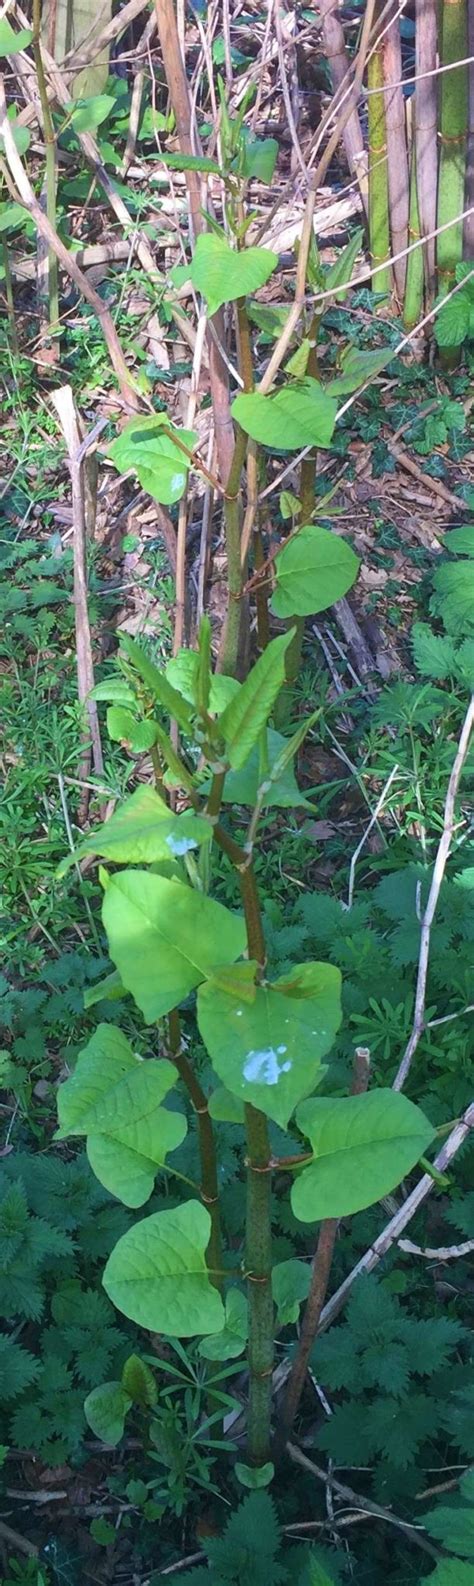 Japanese Knotweed Do You Know What To Look For Allcott Associates